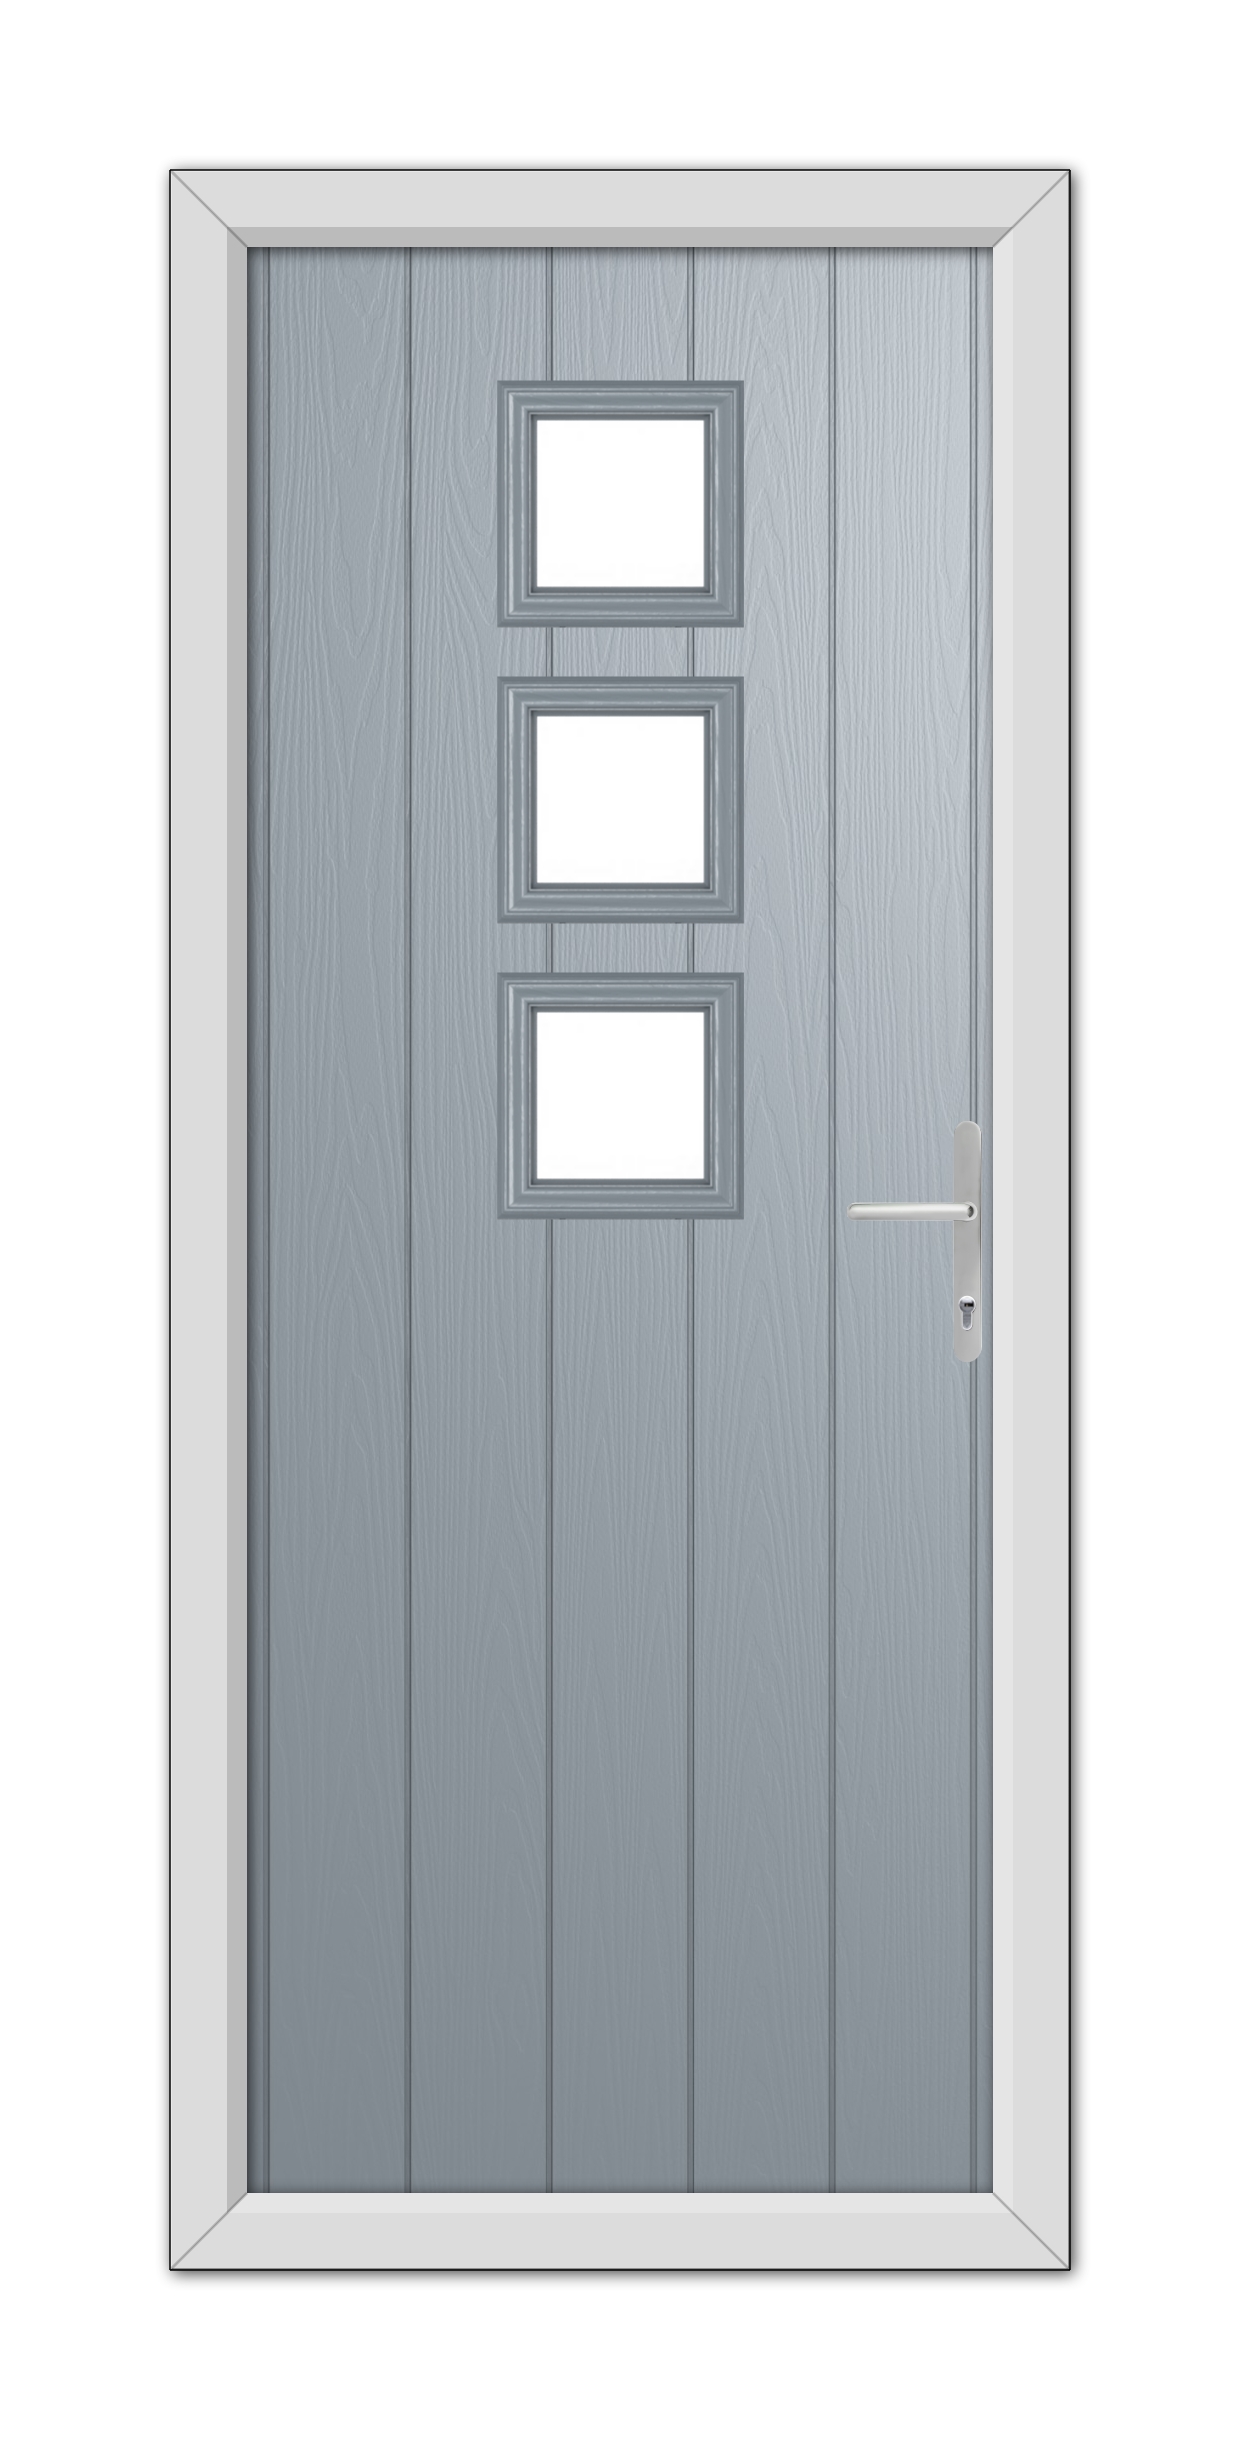 A French Grey Montrose Composite Door 48mm Timber Core with three rectangular glass panels and a silver handle, set within a white frame.